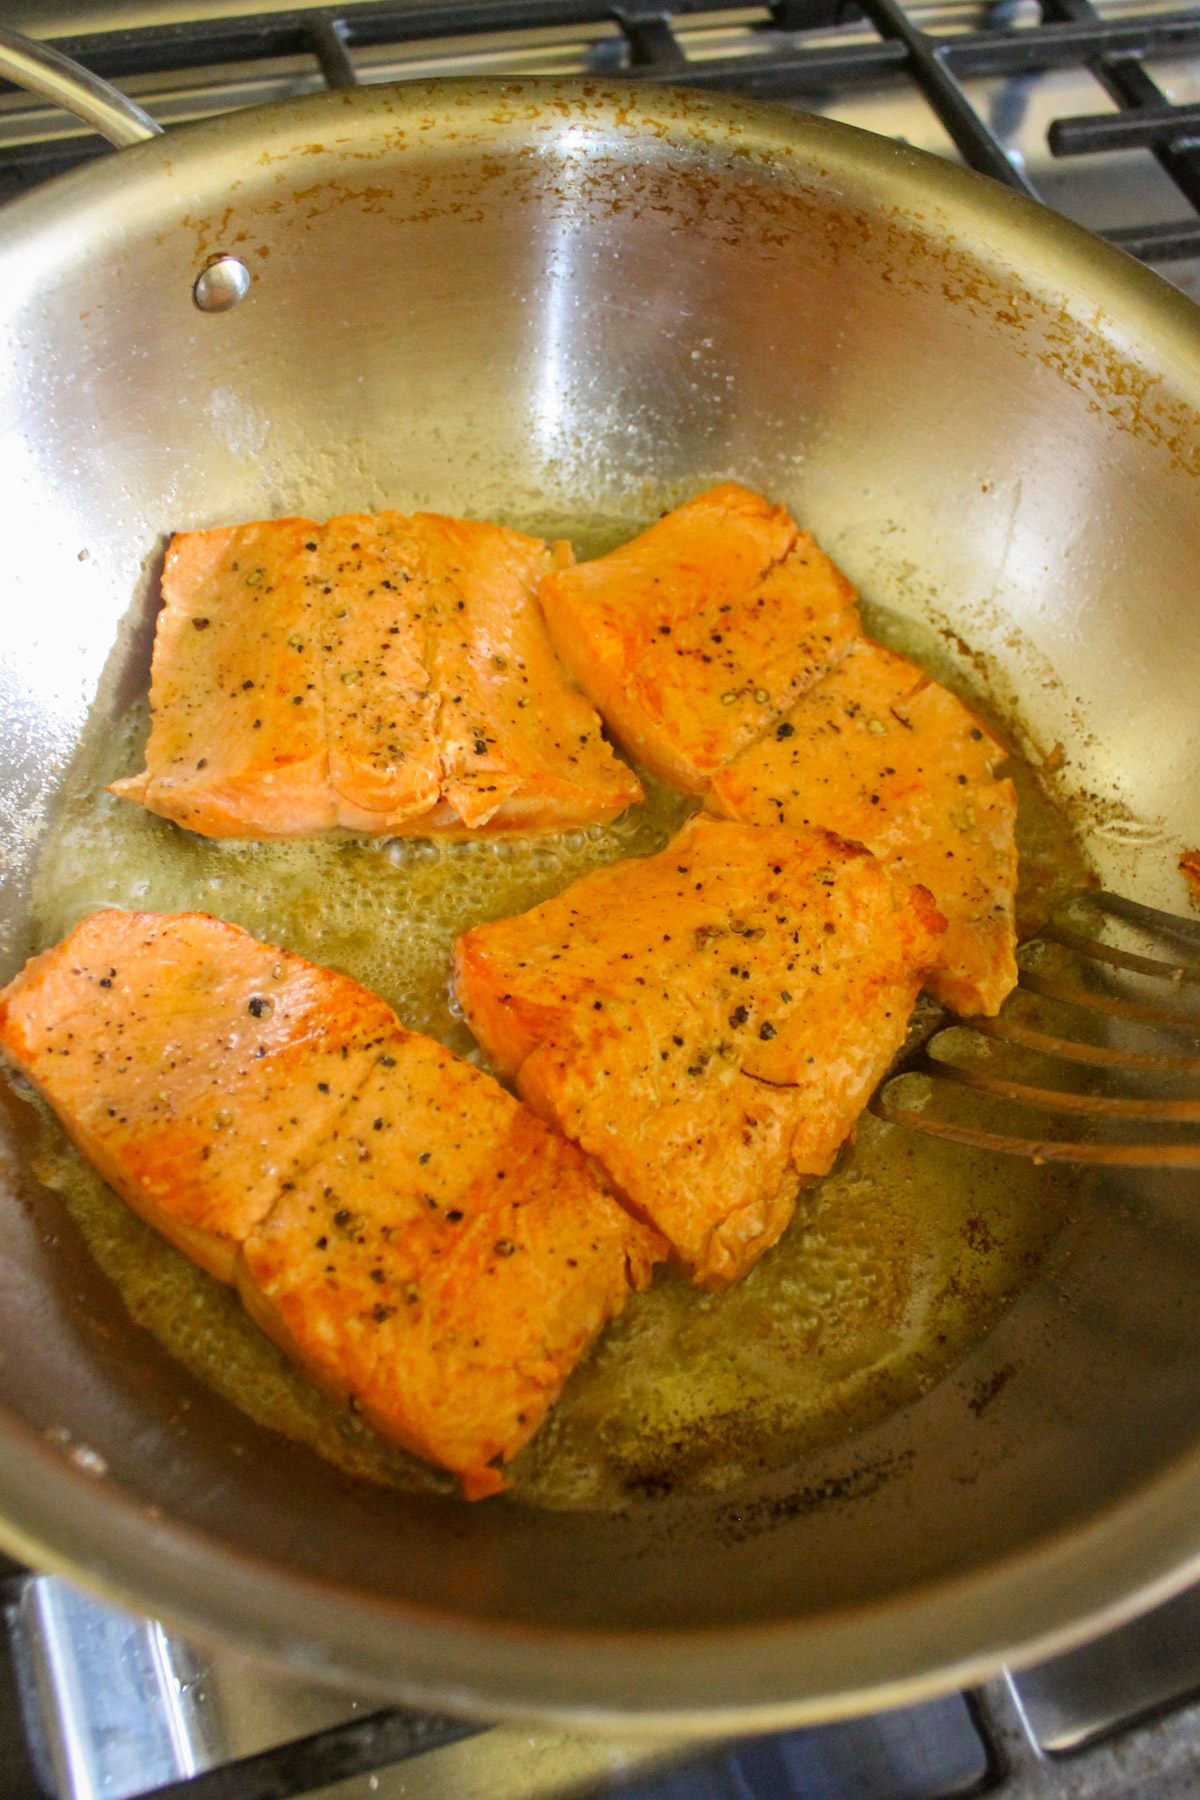 Pan frying four salmon filets in a skillet.